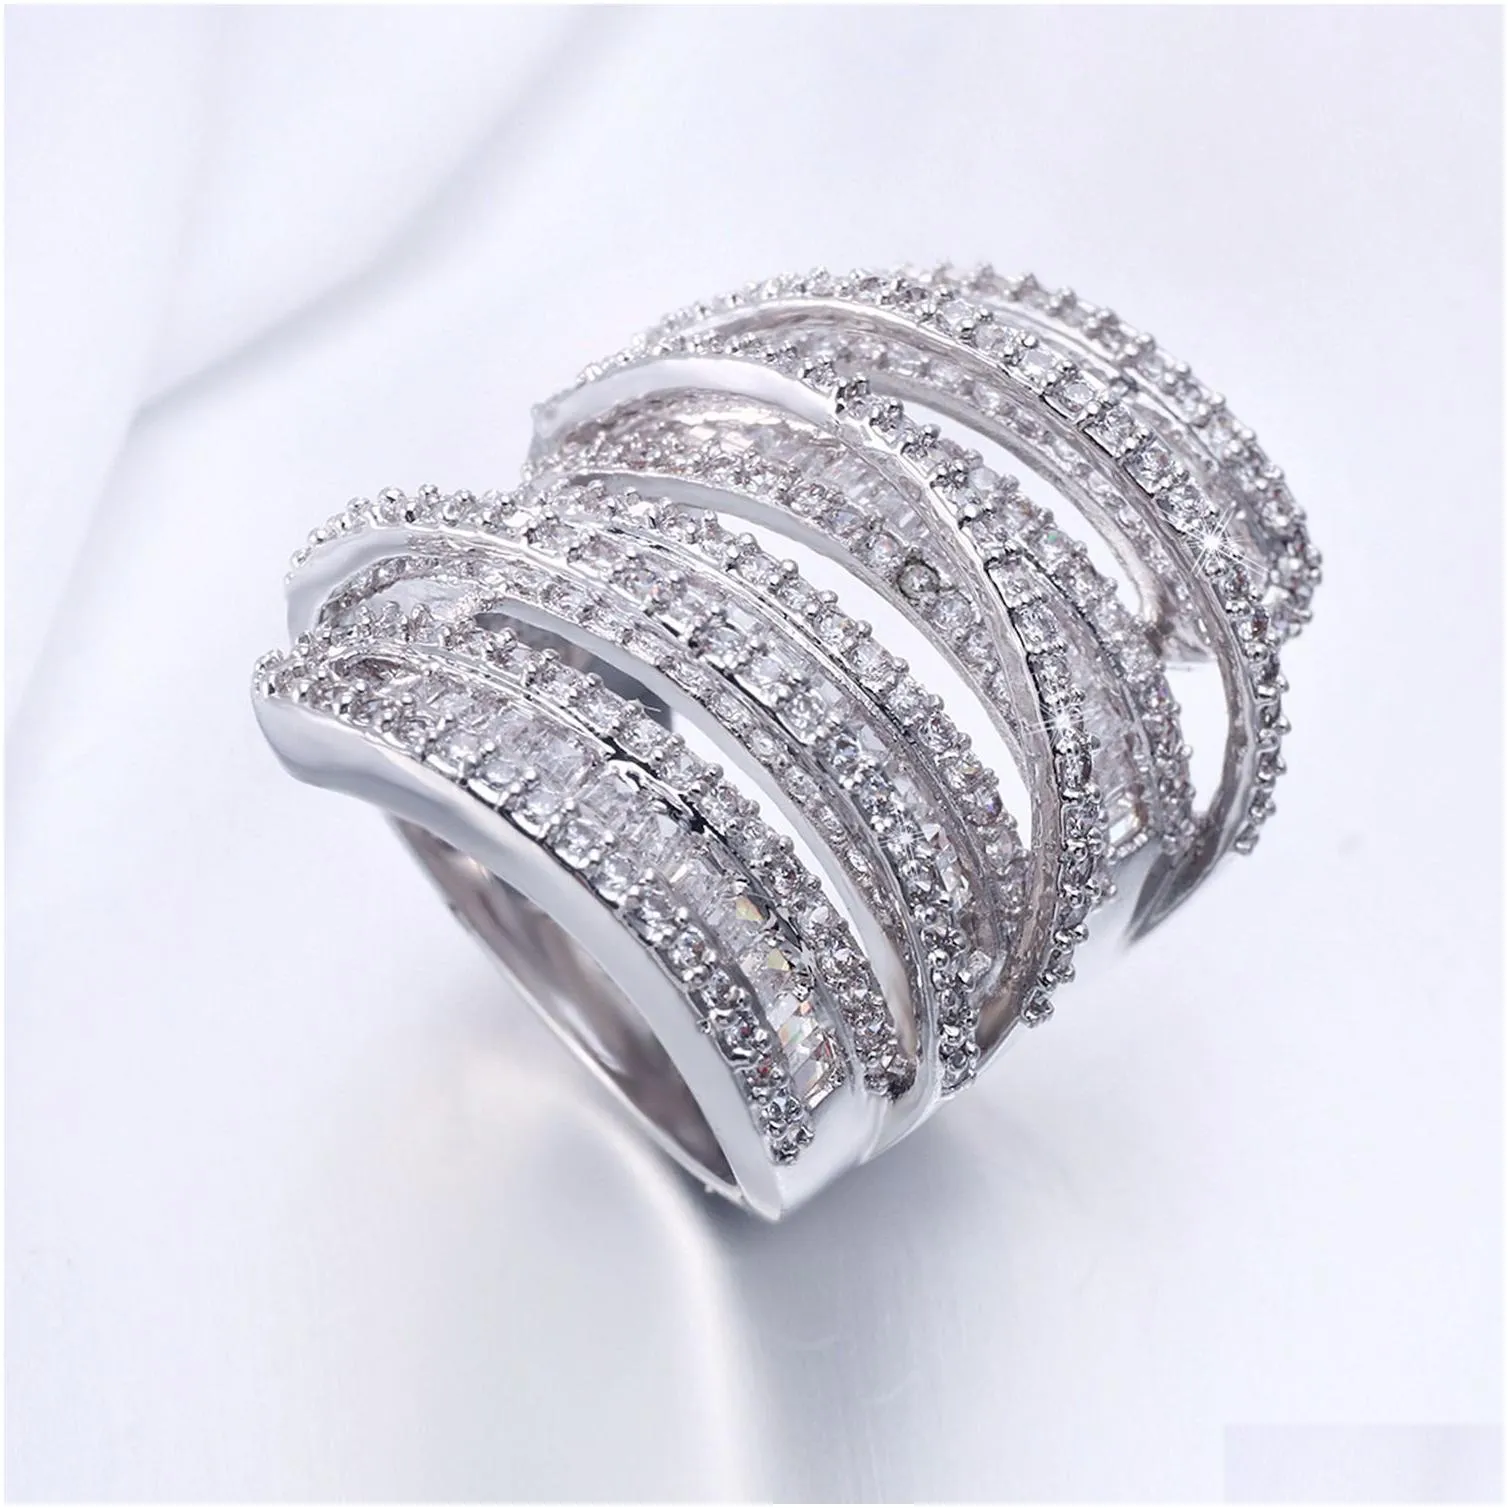 Full Princess Cut Luxury Jewelry 925 Sterling Siver 925 Sterling Silver White Sapphire Simulated Diamond Gemstones Wedding Women Ring